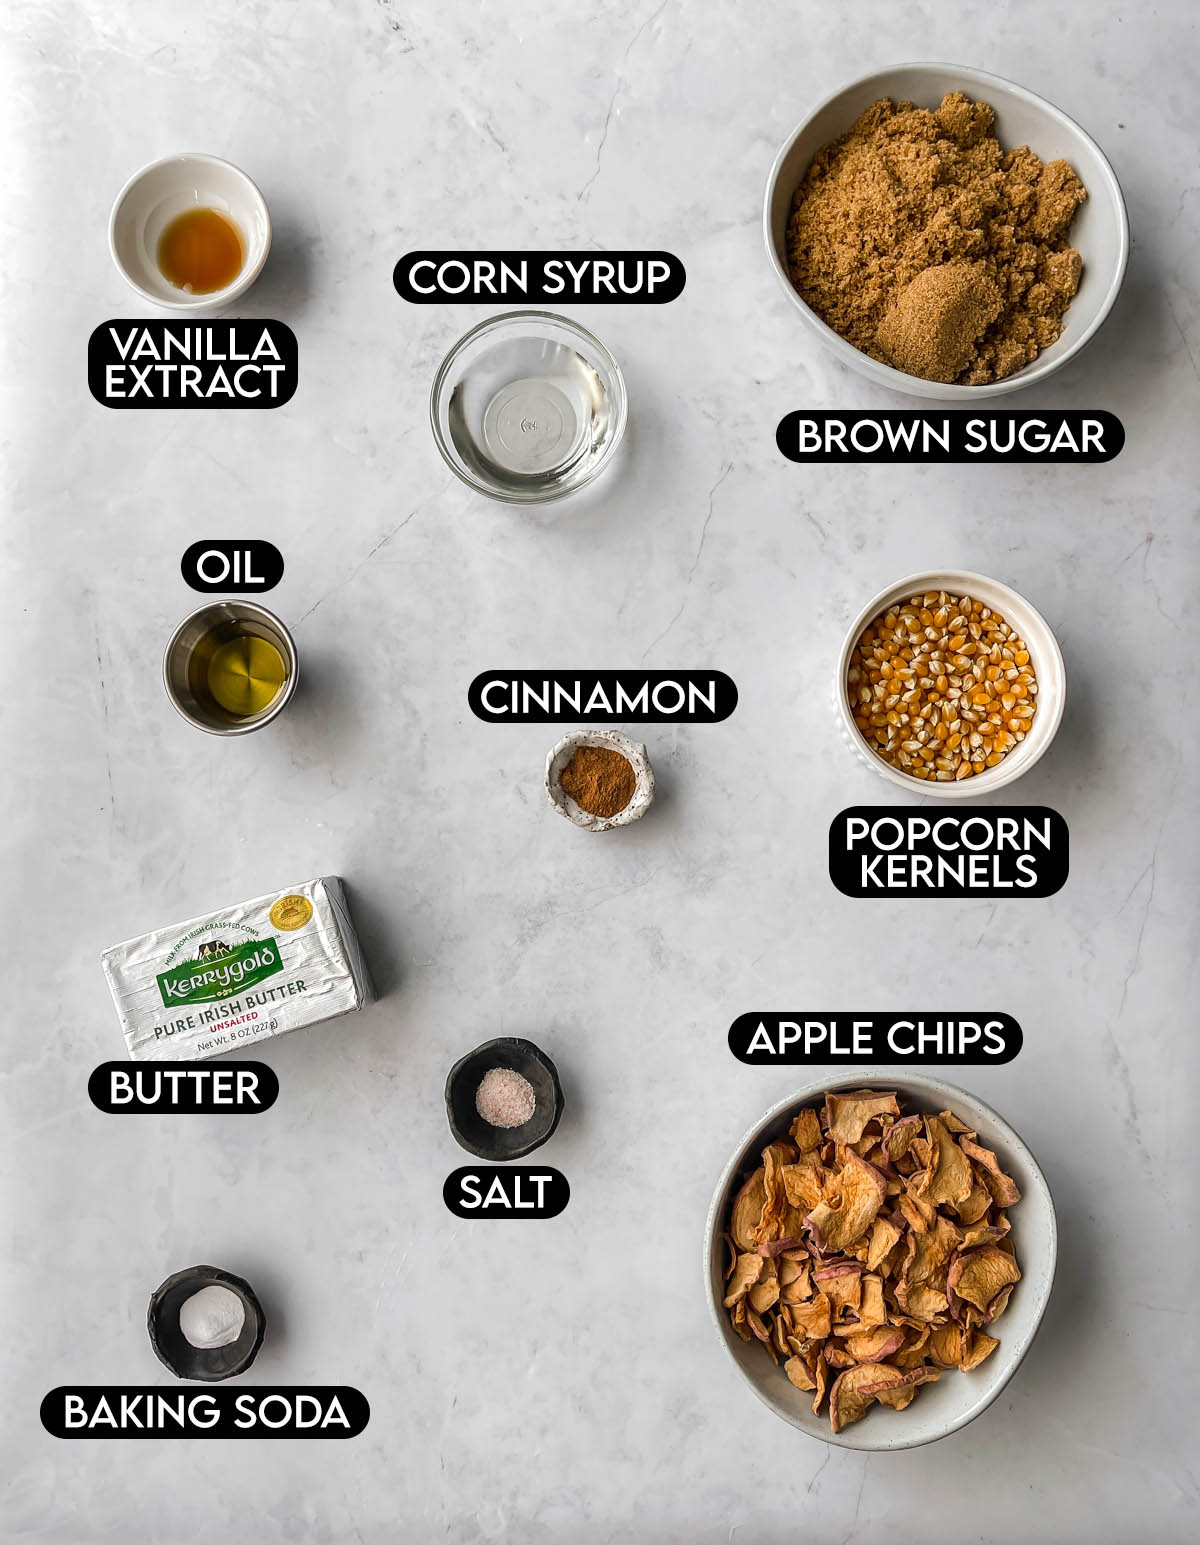 Labeled ingredients for caramel apple popcorn: vanilla extract, corn syrup, brown sugar, oil, cinnamon, popcorn kernels, butter, salt, apple chips, and baking soda.